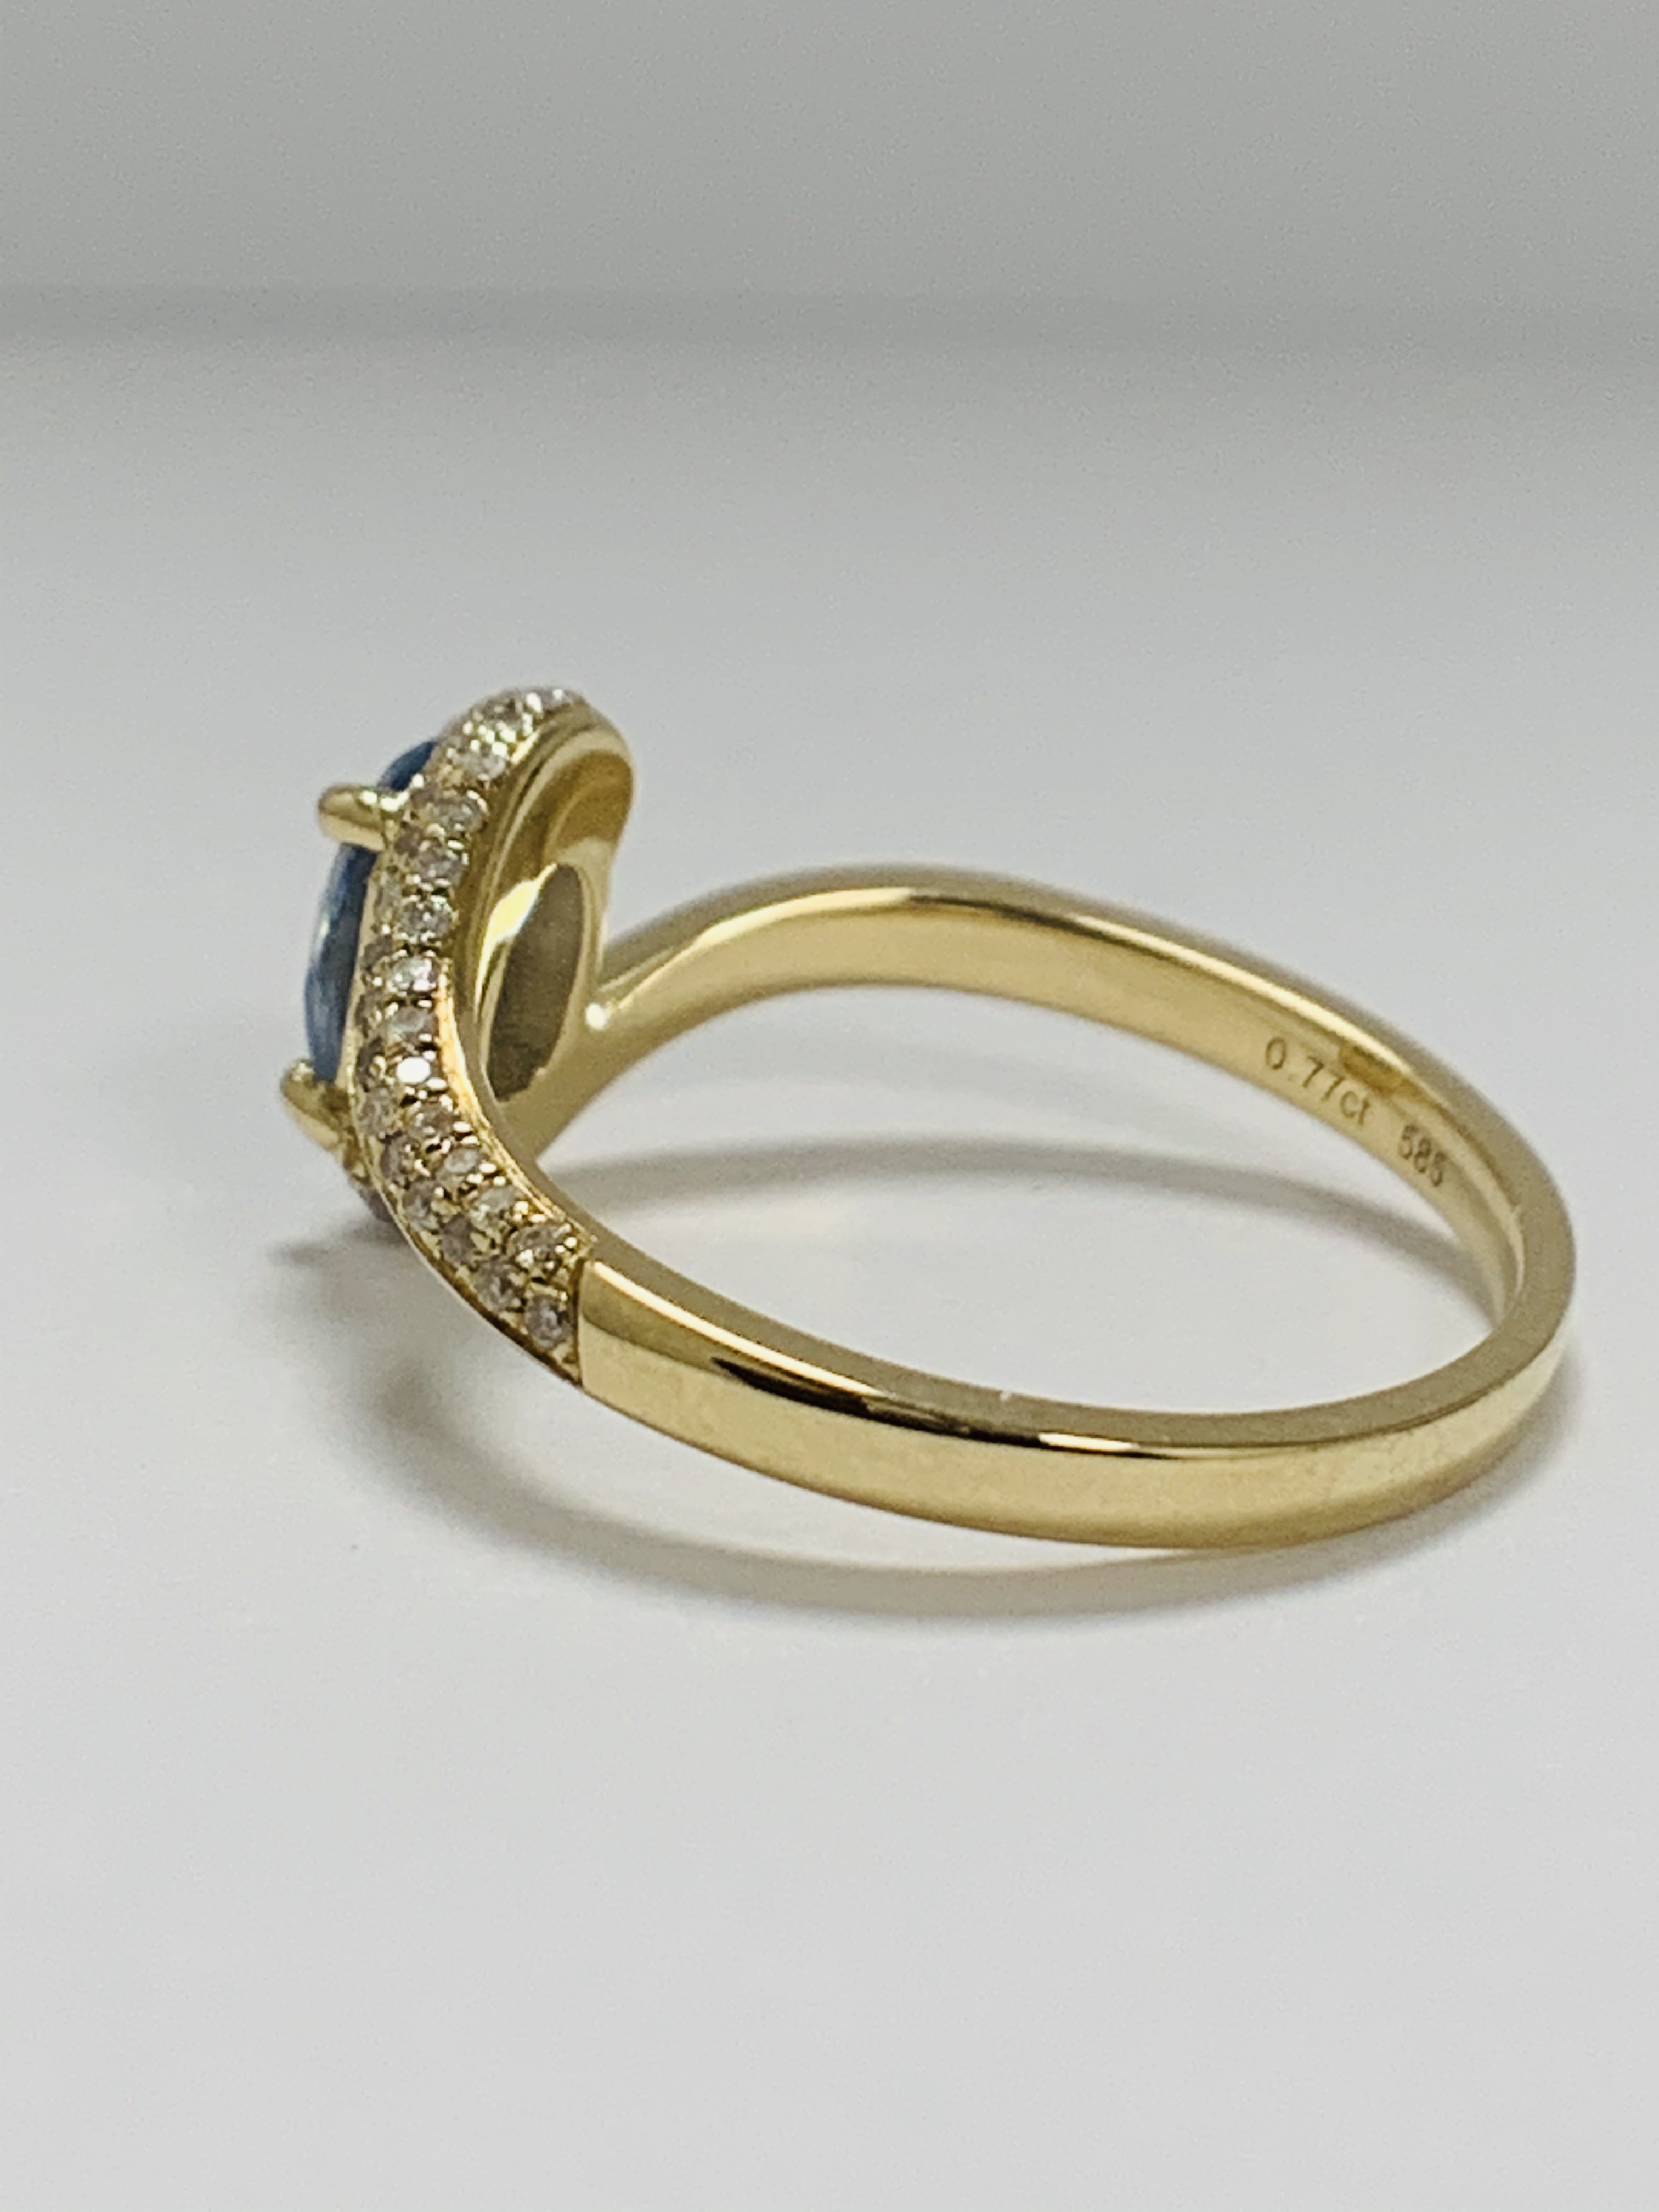 14ct Yellow Gold Sapphire and Diamond ring featuring centre, oval cut, light blue Sapphire (0.77ct), - Image 3 of 10